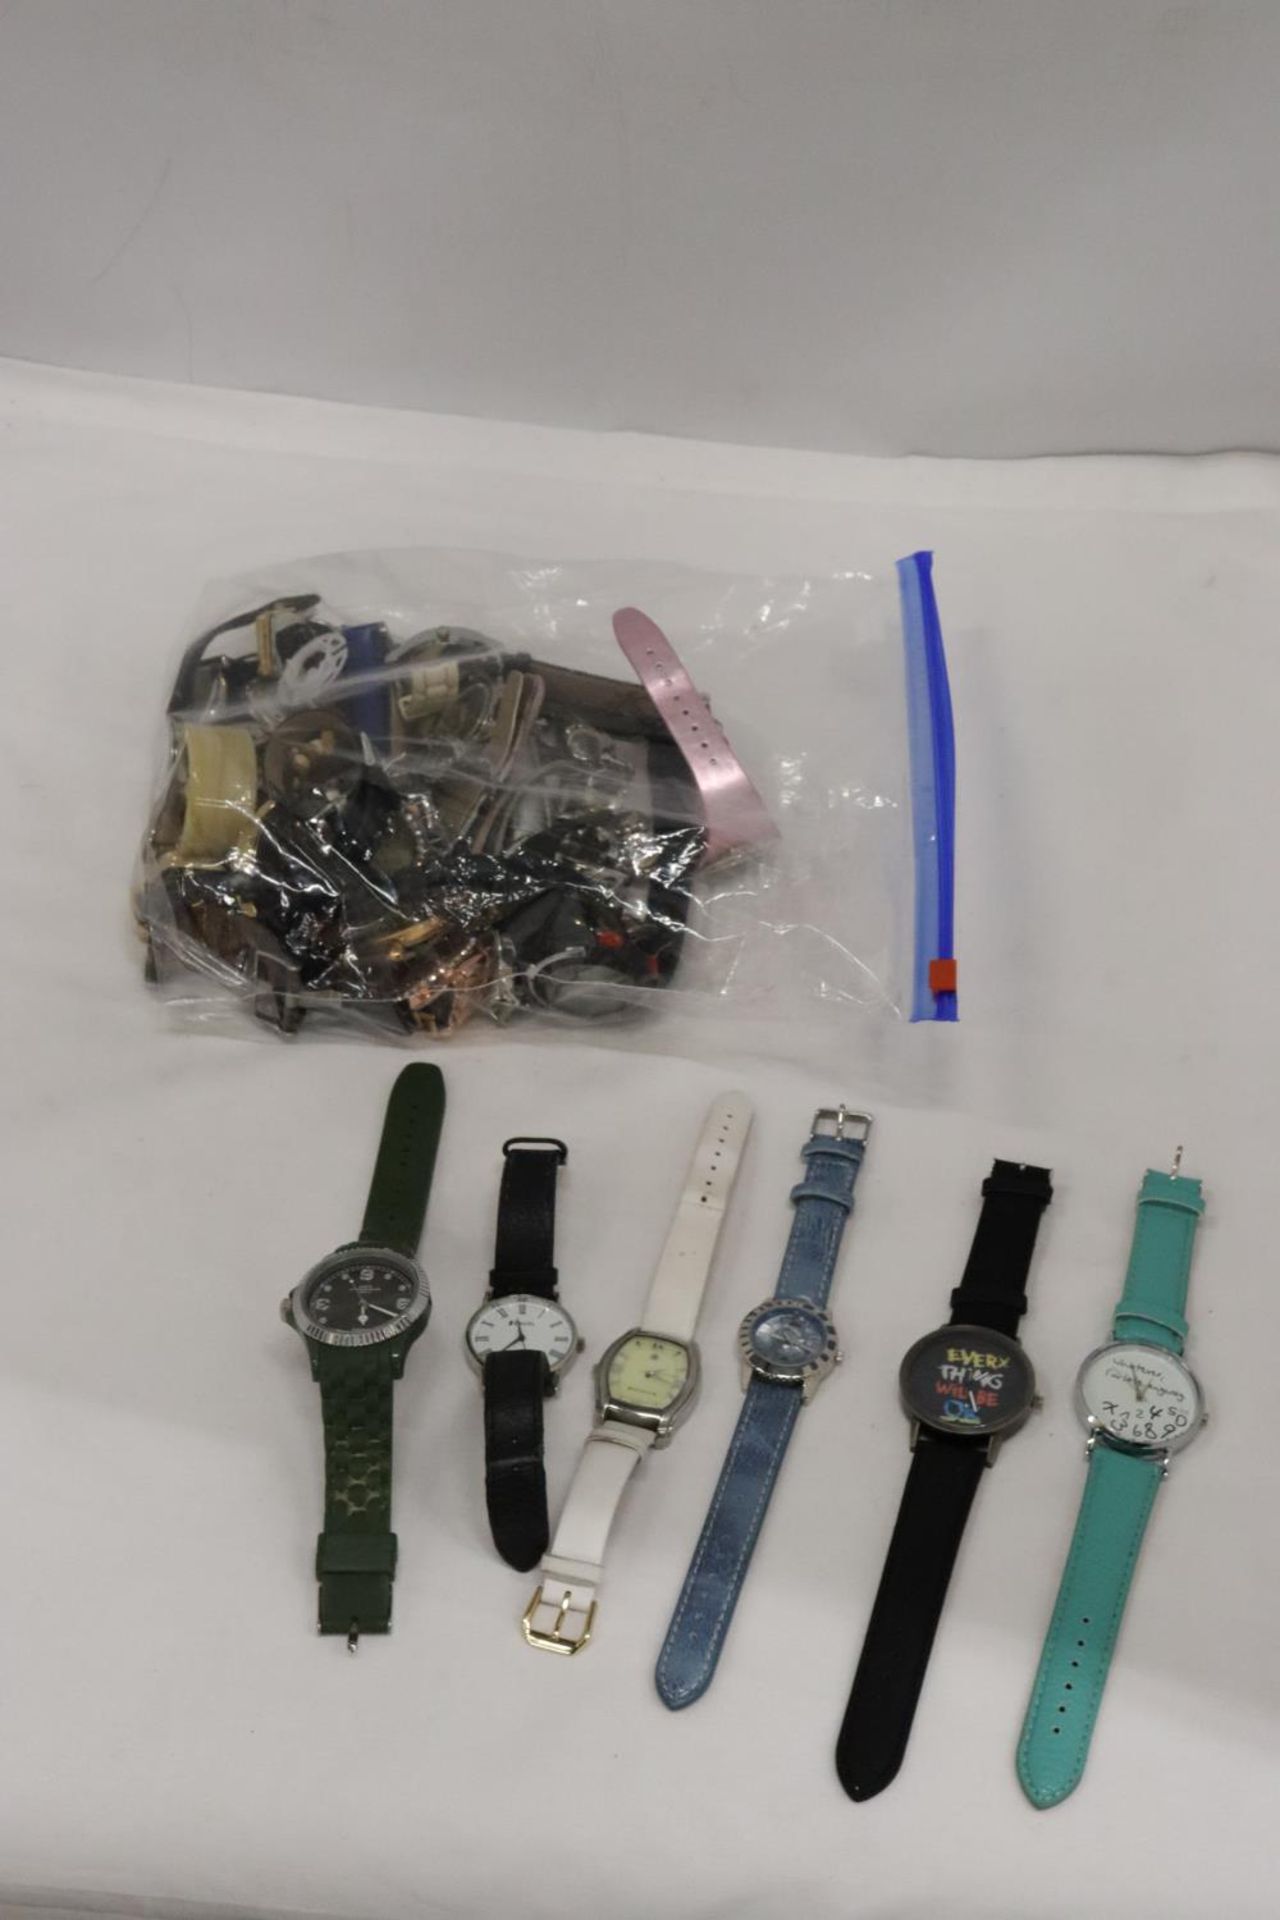 A LARGE COLLECTION OF WRIST WATCHES